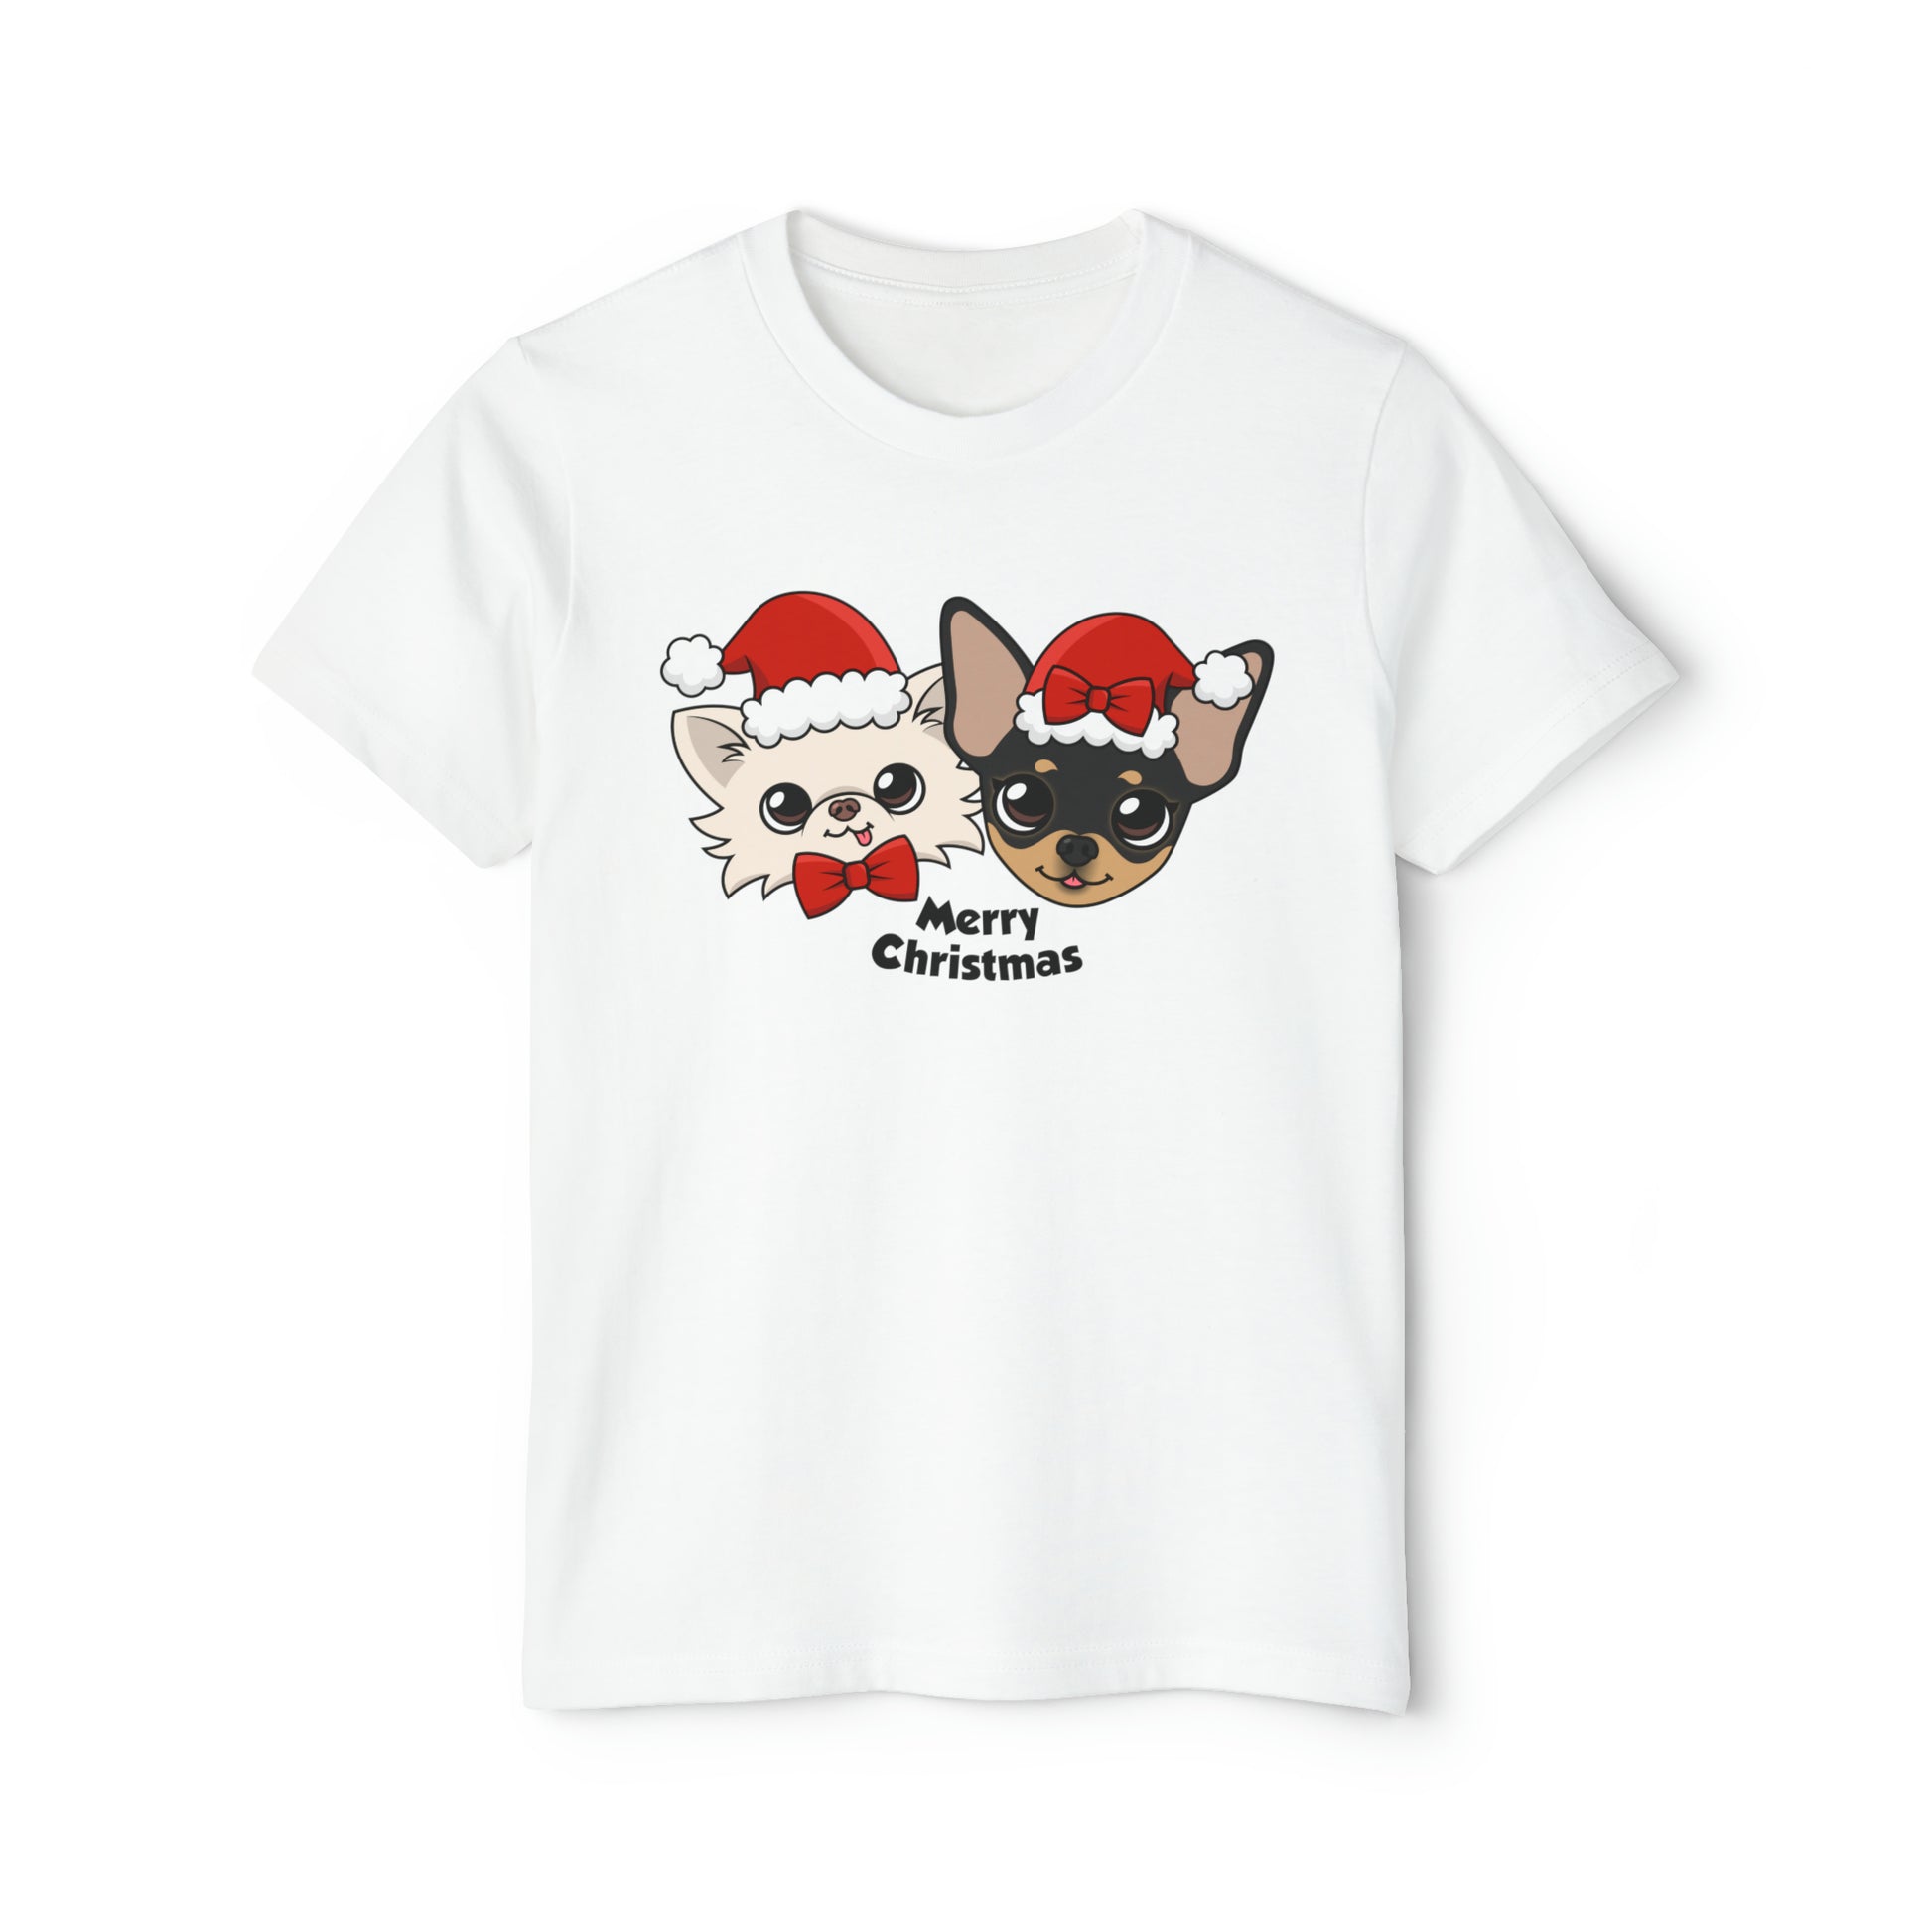 Cedric and Maya Merry Christmas Youth Short Sleeve Holiday Outfit Set - Tiny Chihuahua Shop